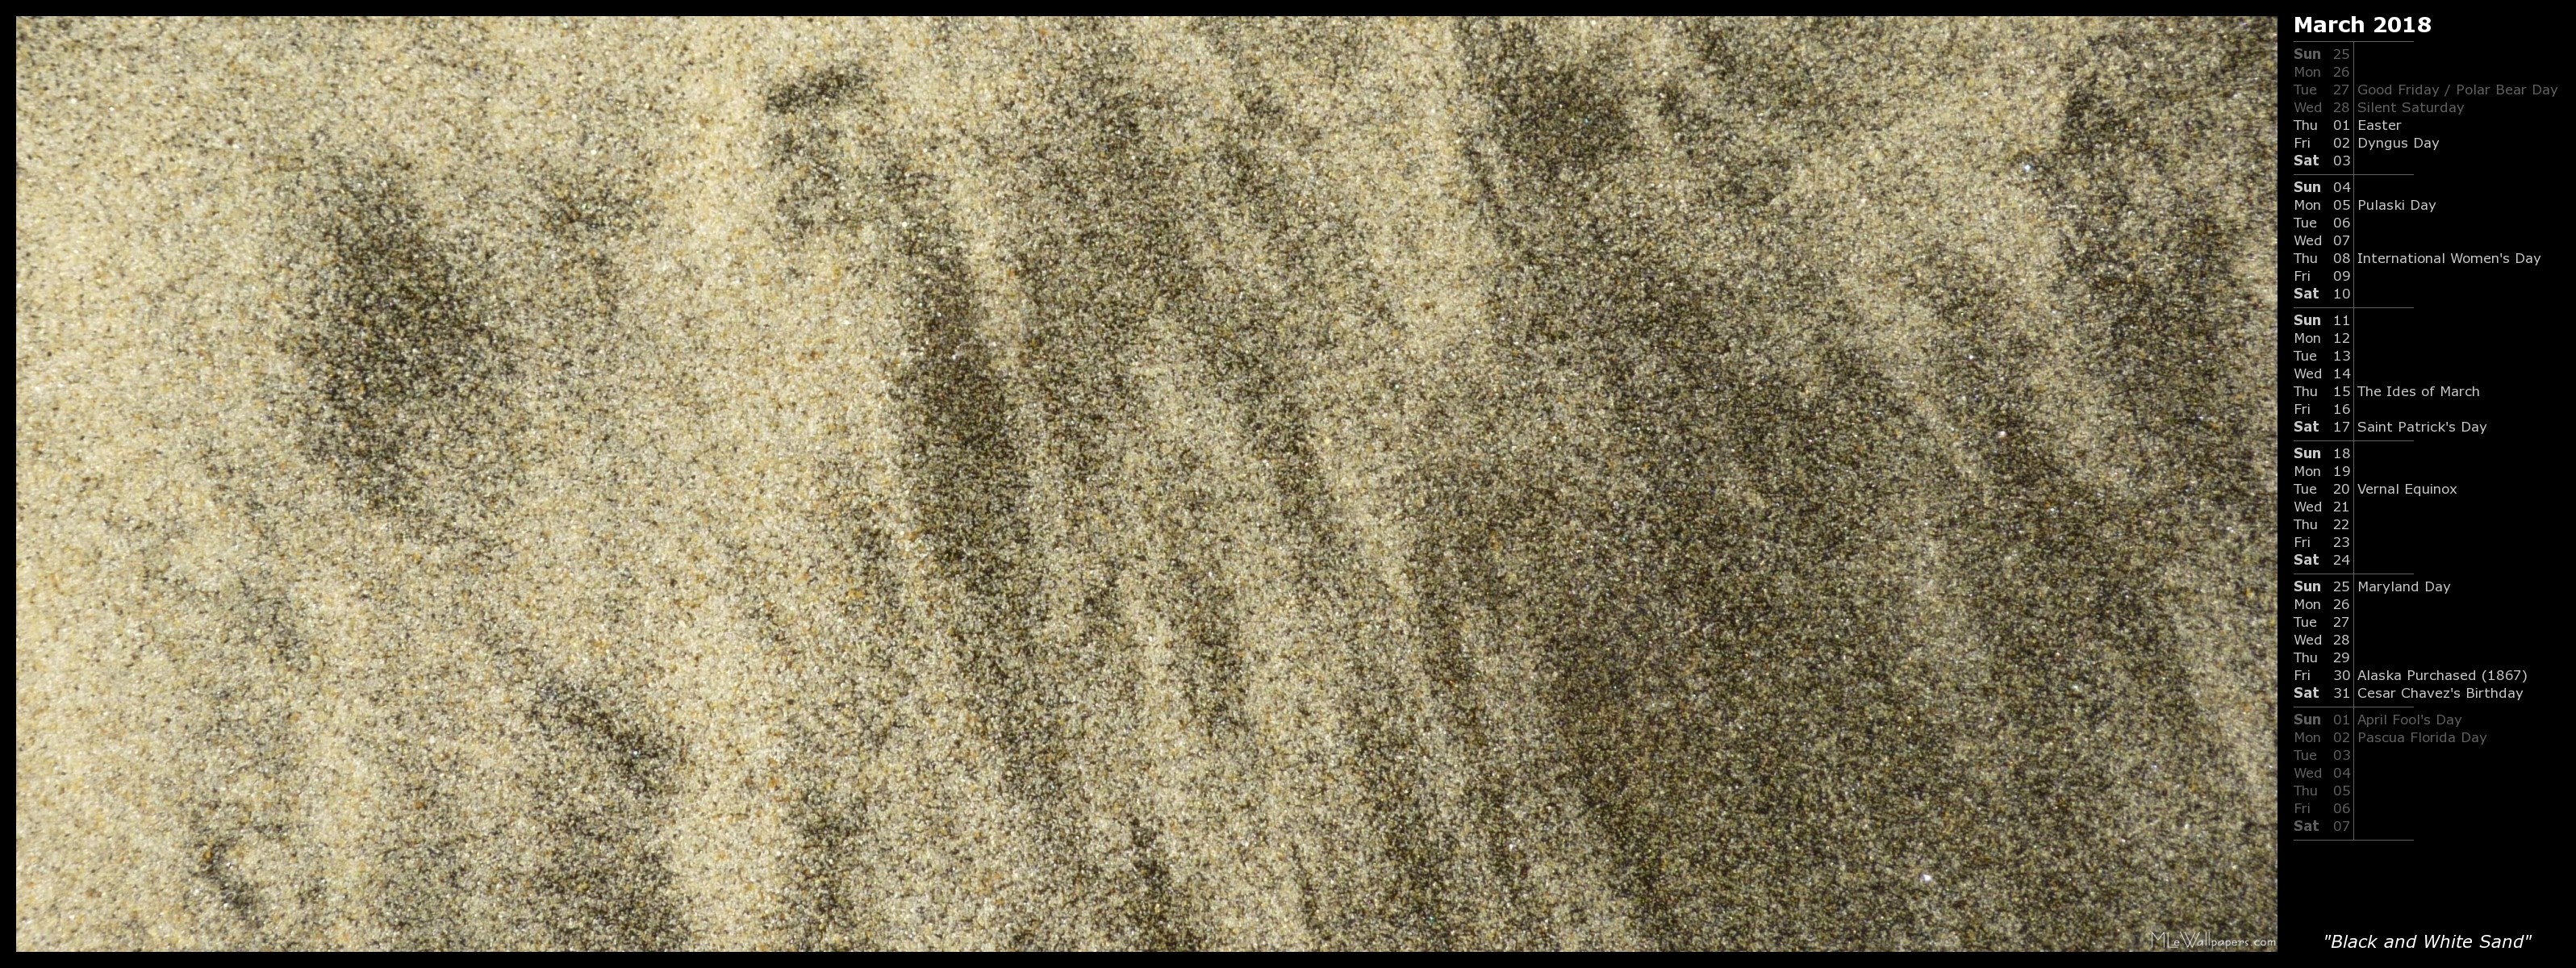 Black sand beaches are beautiful, and so are white sand beaches. A mix of the two colors makes this abstract nature wallpaper interesting